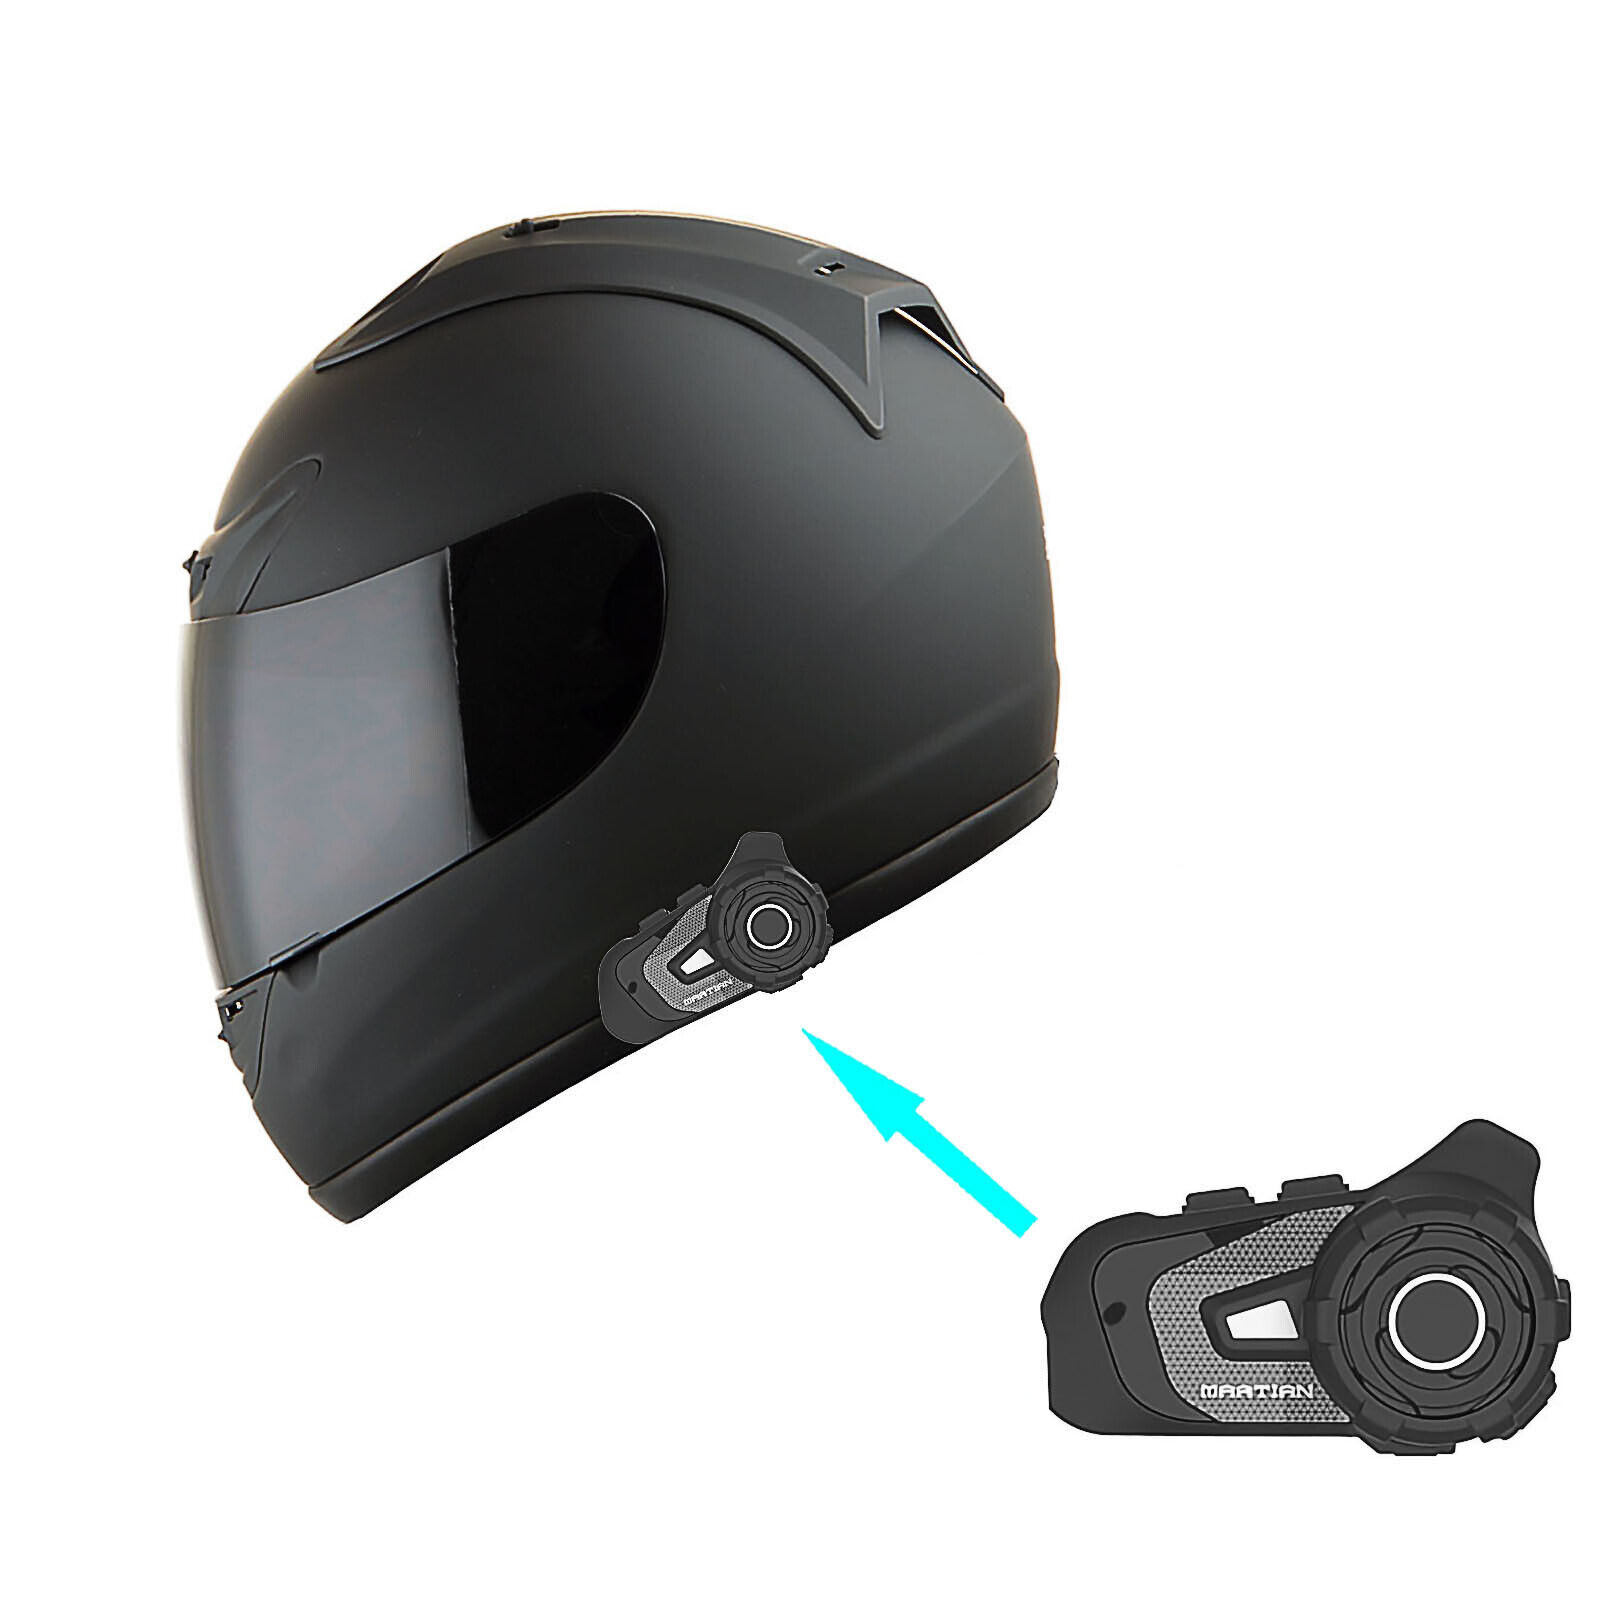 1Storm New Motorcycle JH901 Bike Full Face Helmet + One Clear Shield + Bluetooth